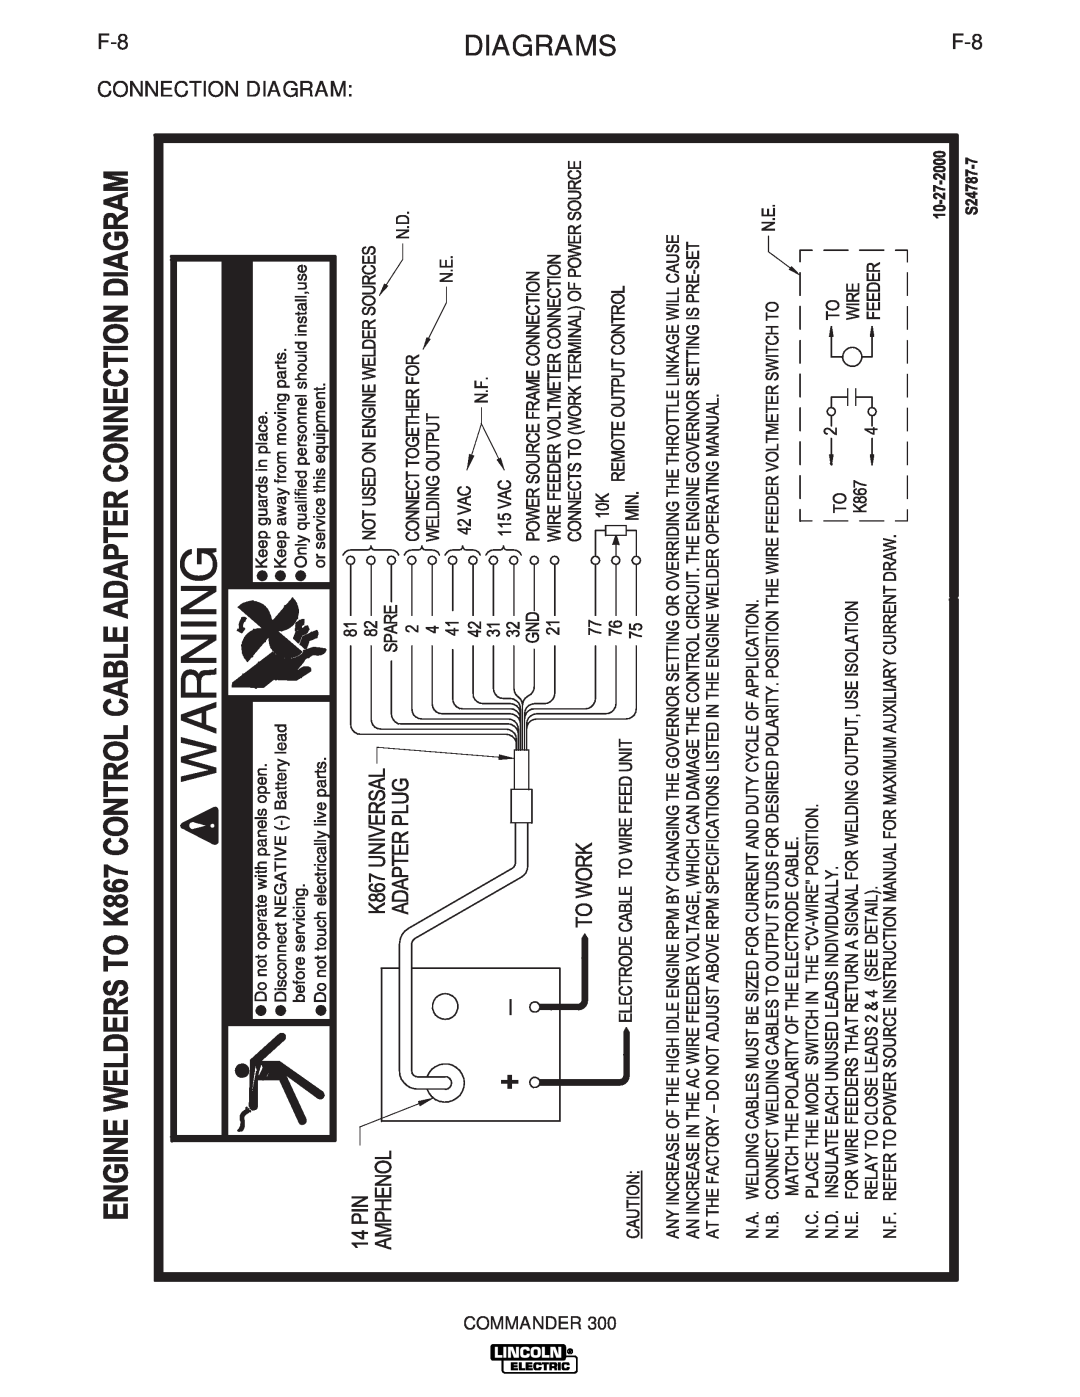 Lincoln Electric IM700-D manual DIAGRAMSF-8, F-8 CONNECTION DIAGRAM, Commander 